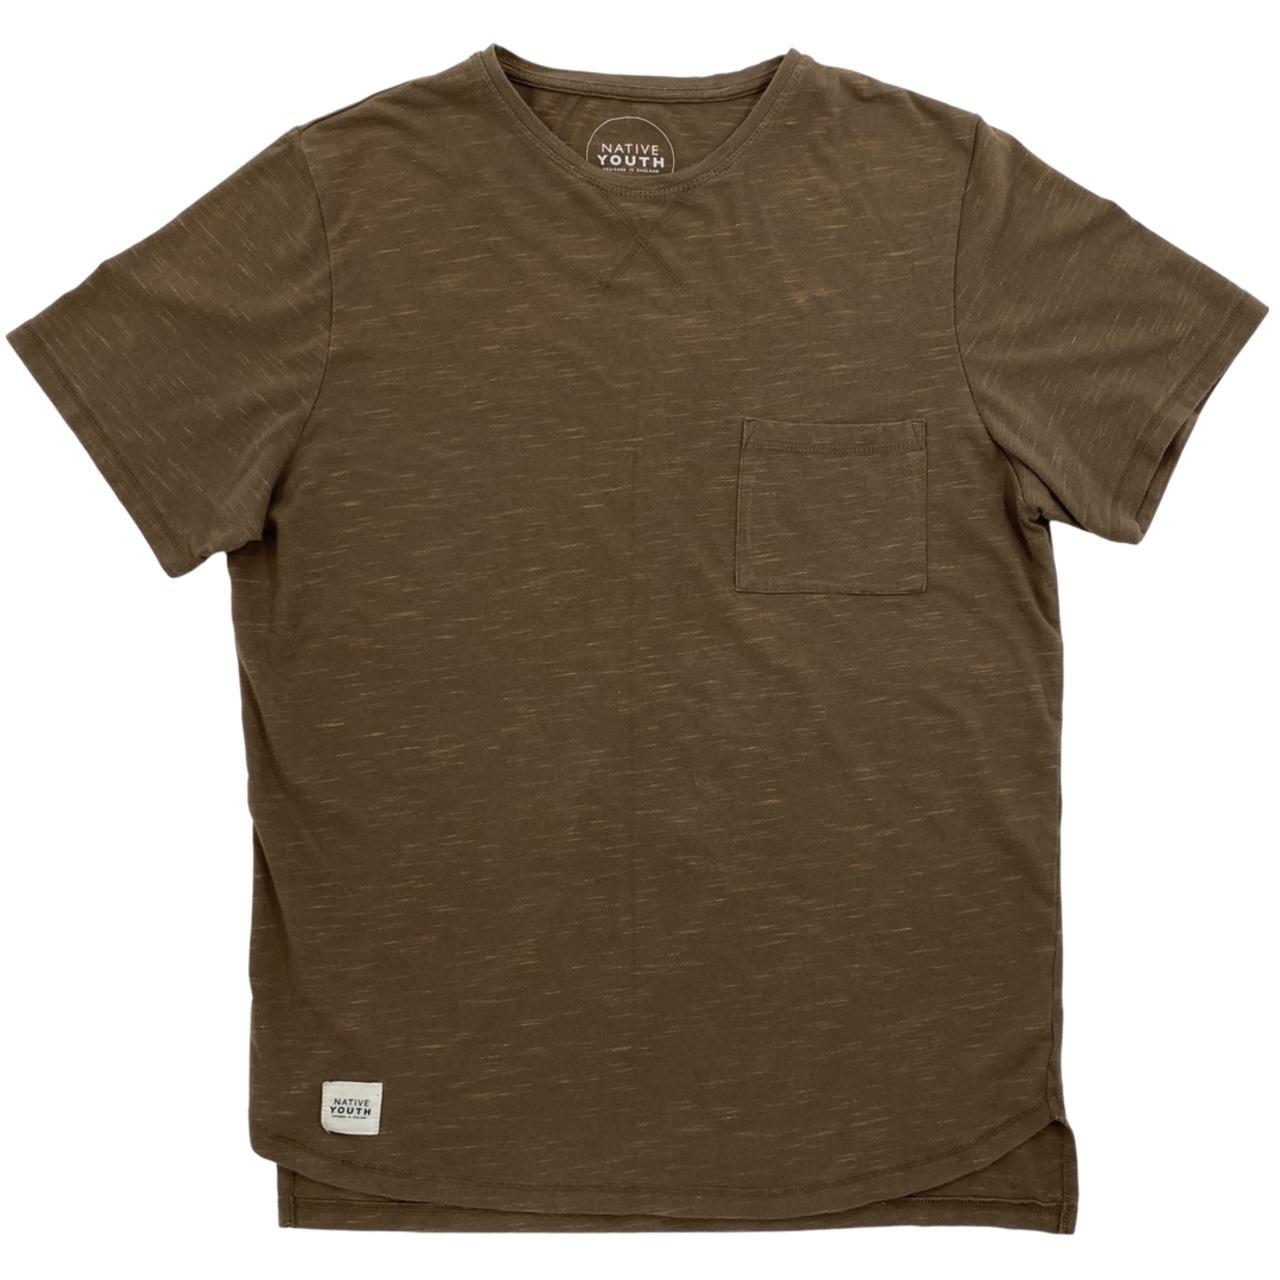 Native Youth Men's Brown and Tan T-shirt